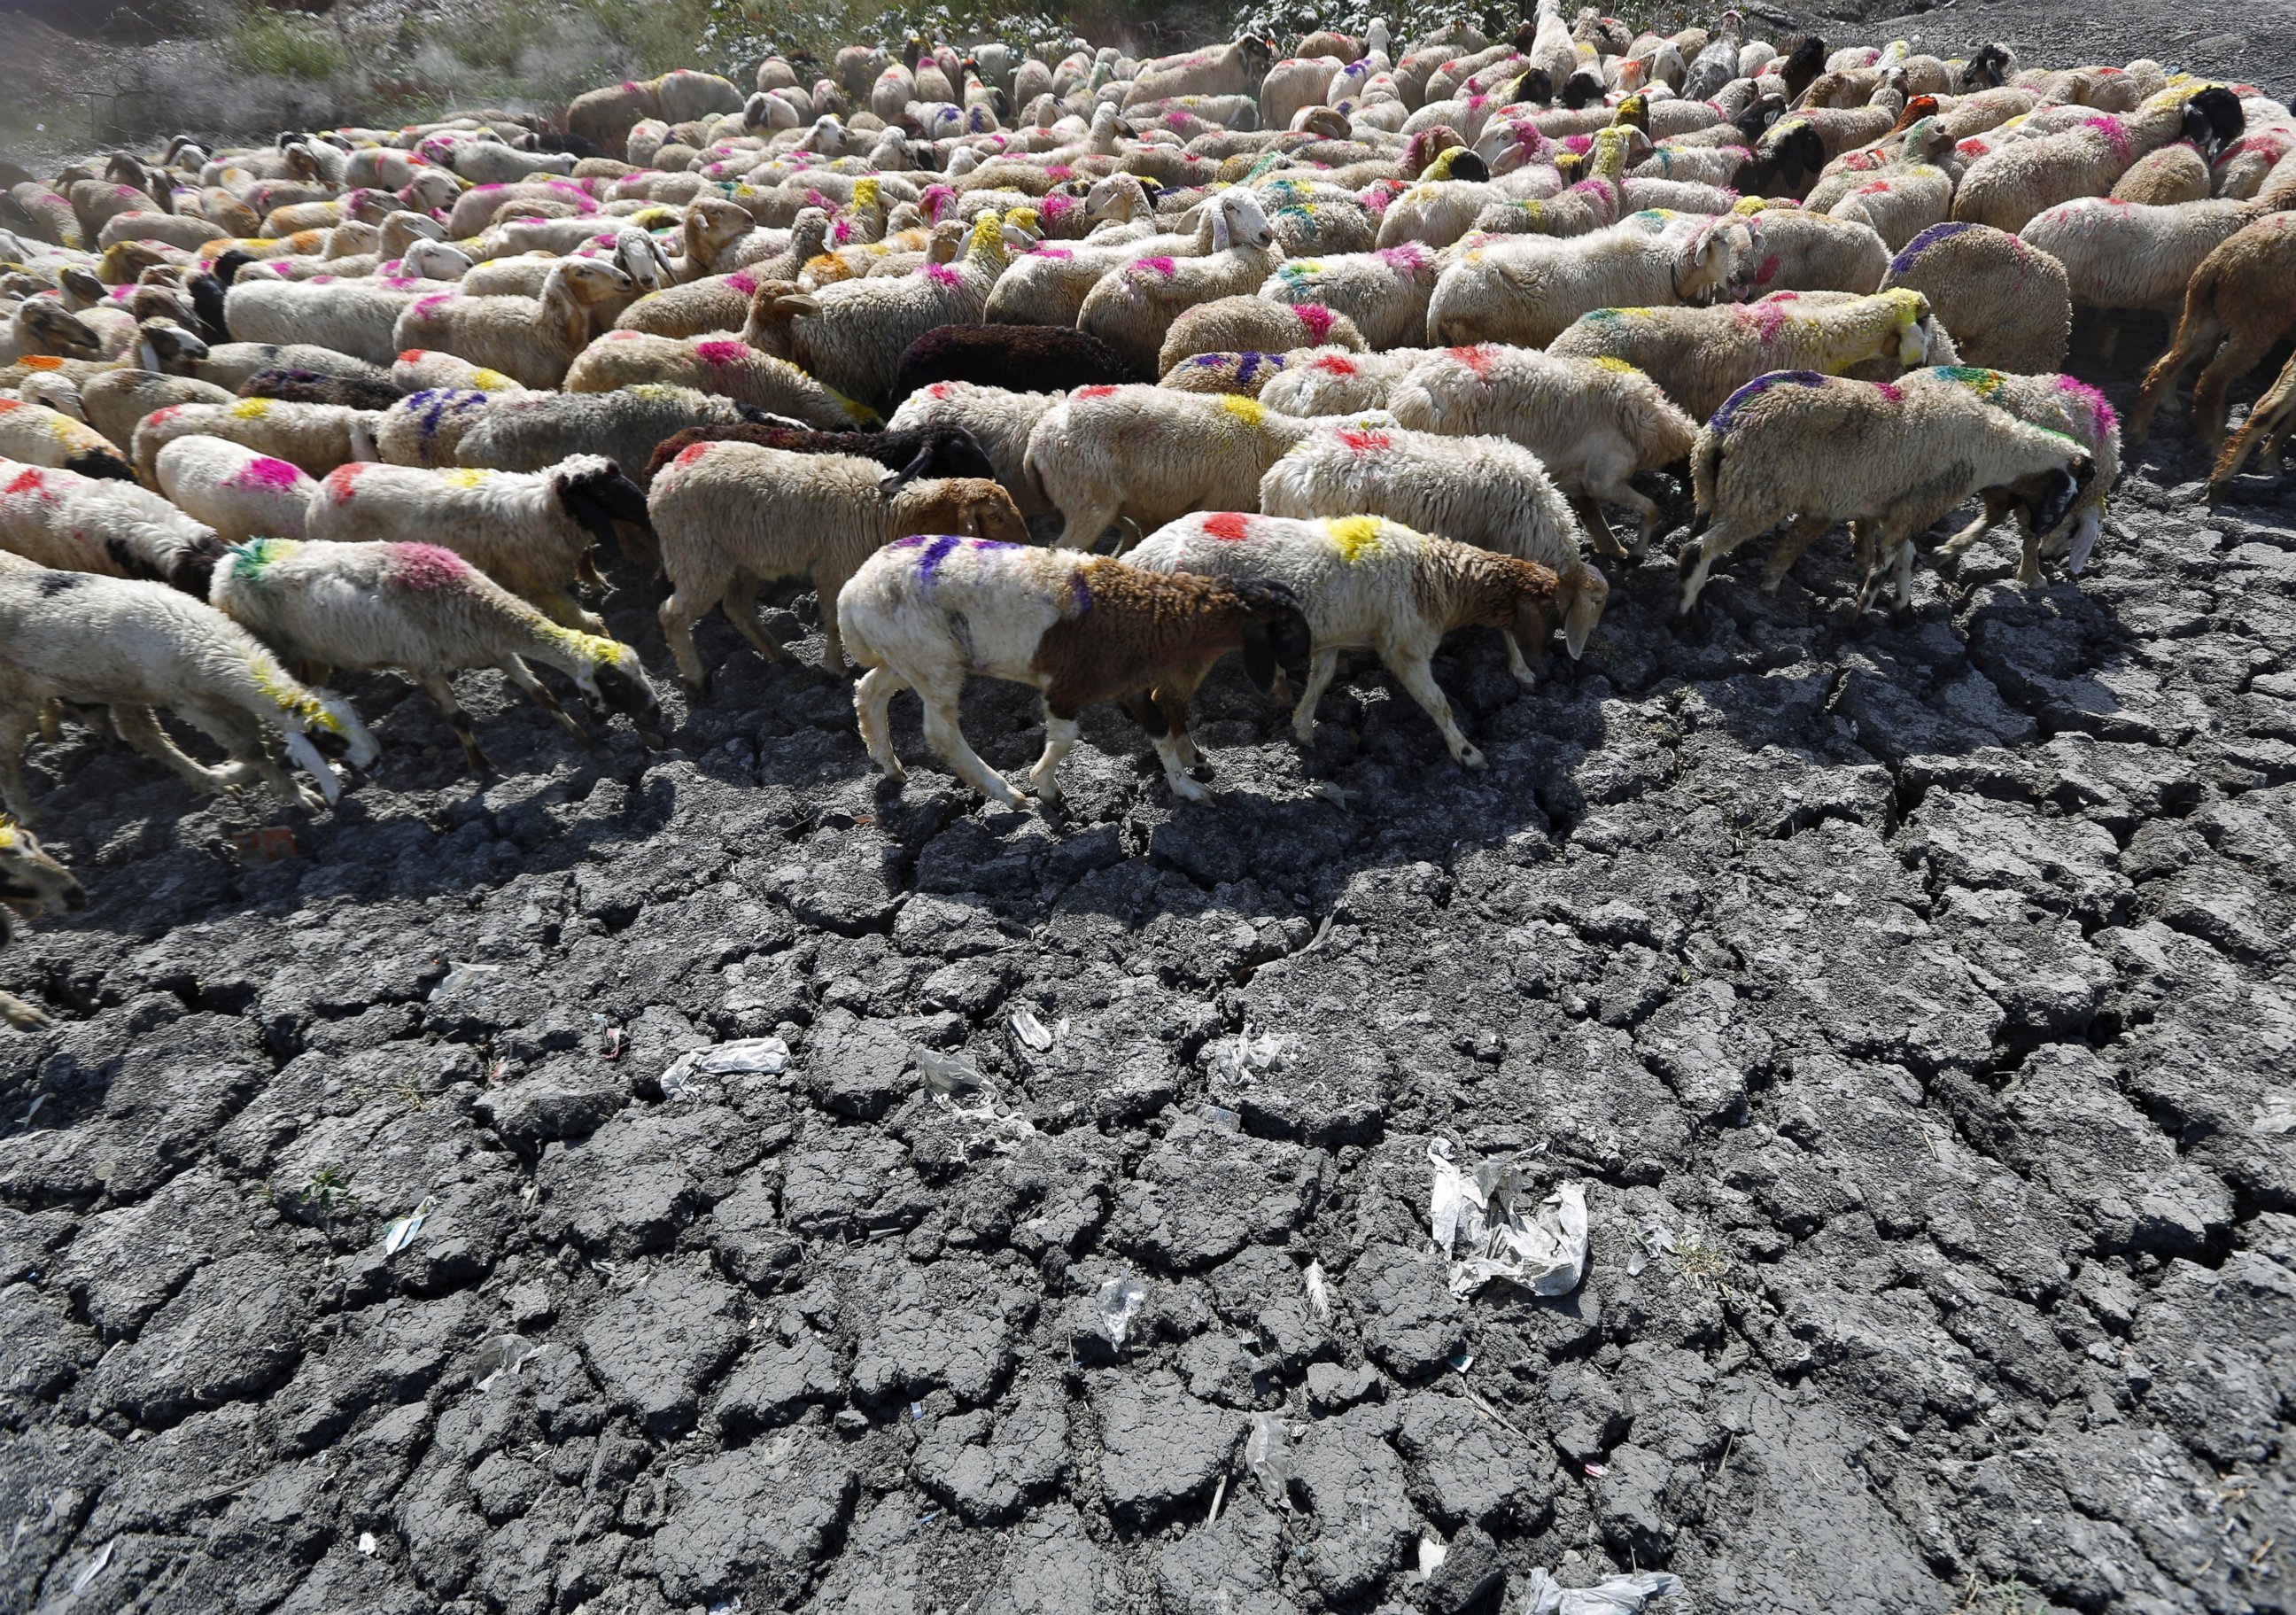 PHOTO: Sheep cross a parched area of a dried-up pond on a hot summer day on the outskirts of New Delhi, May 27, 2015.